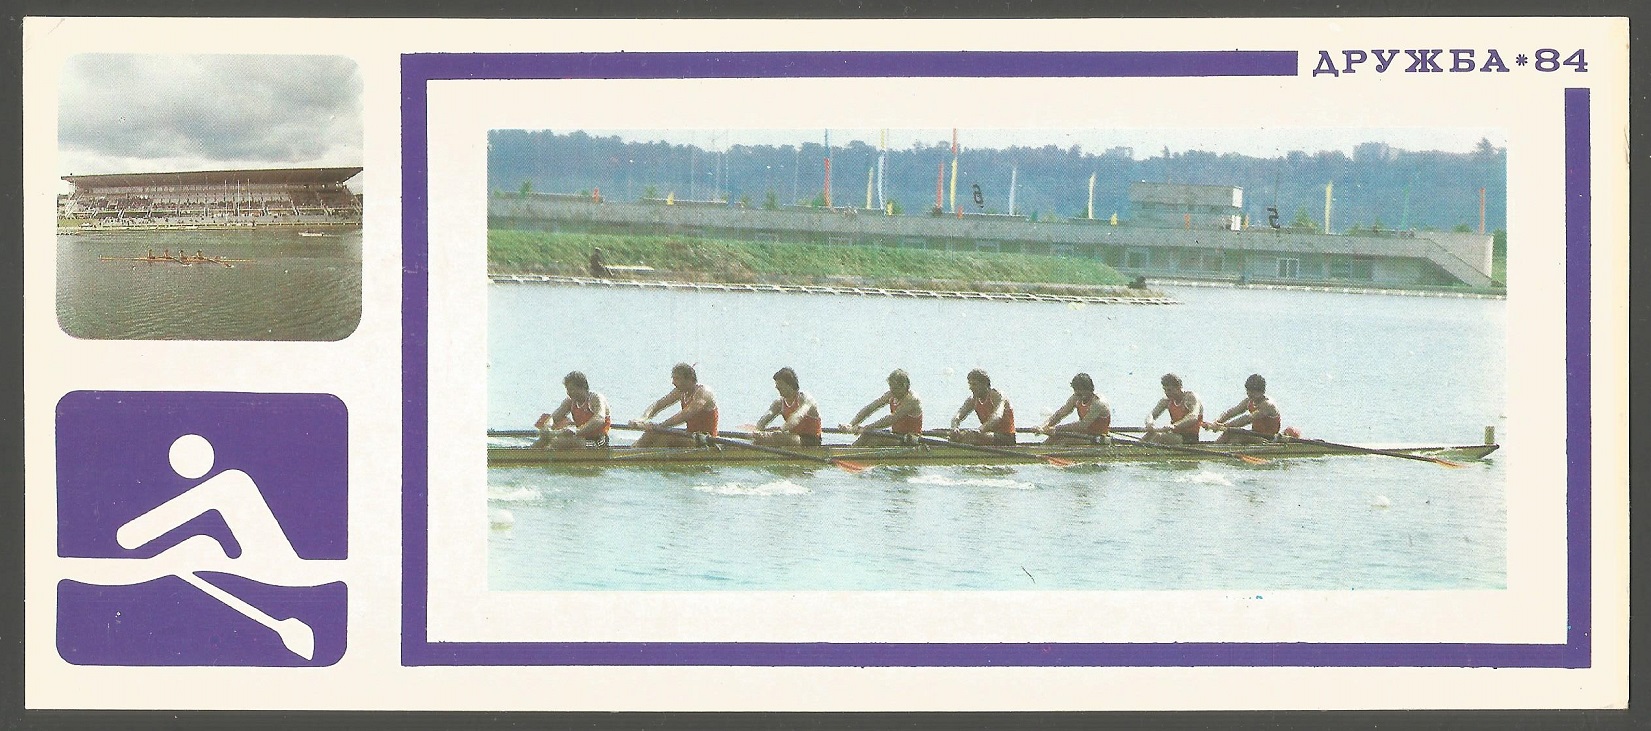 Illustrated card URS 1985 M8 on Moscow regatta course pictogram front